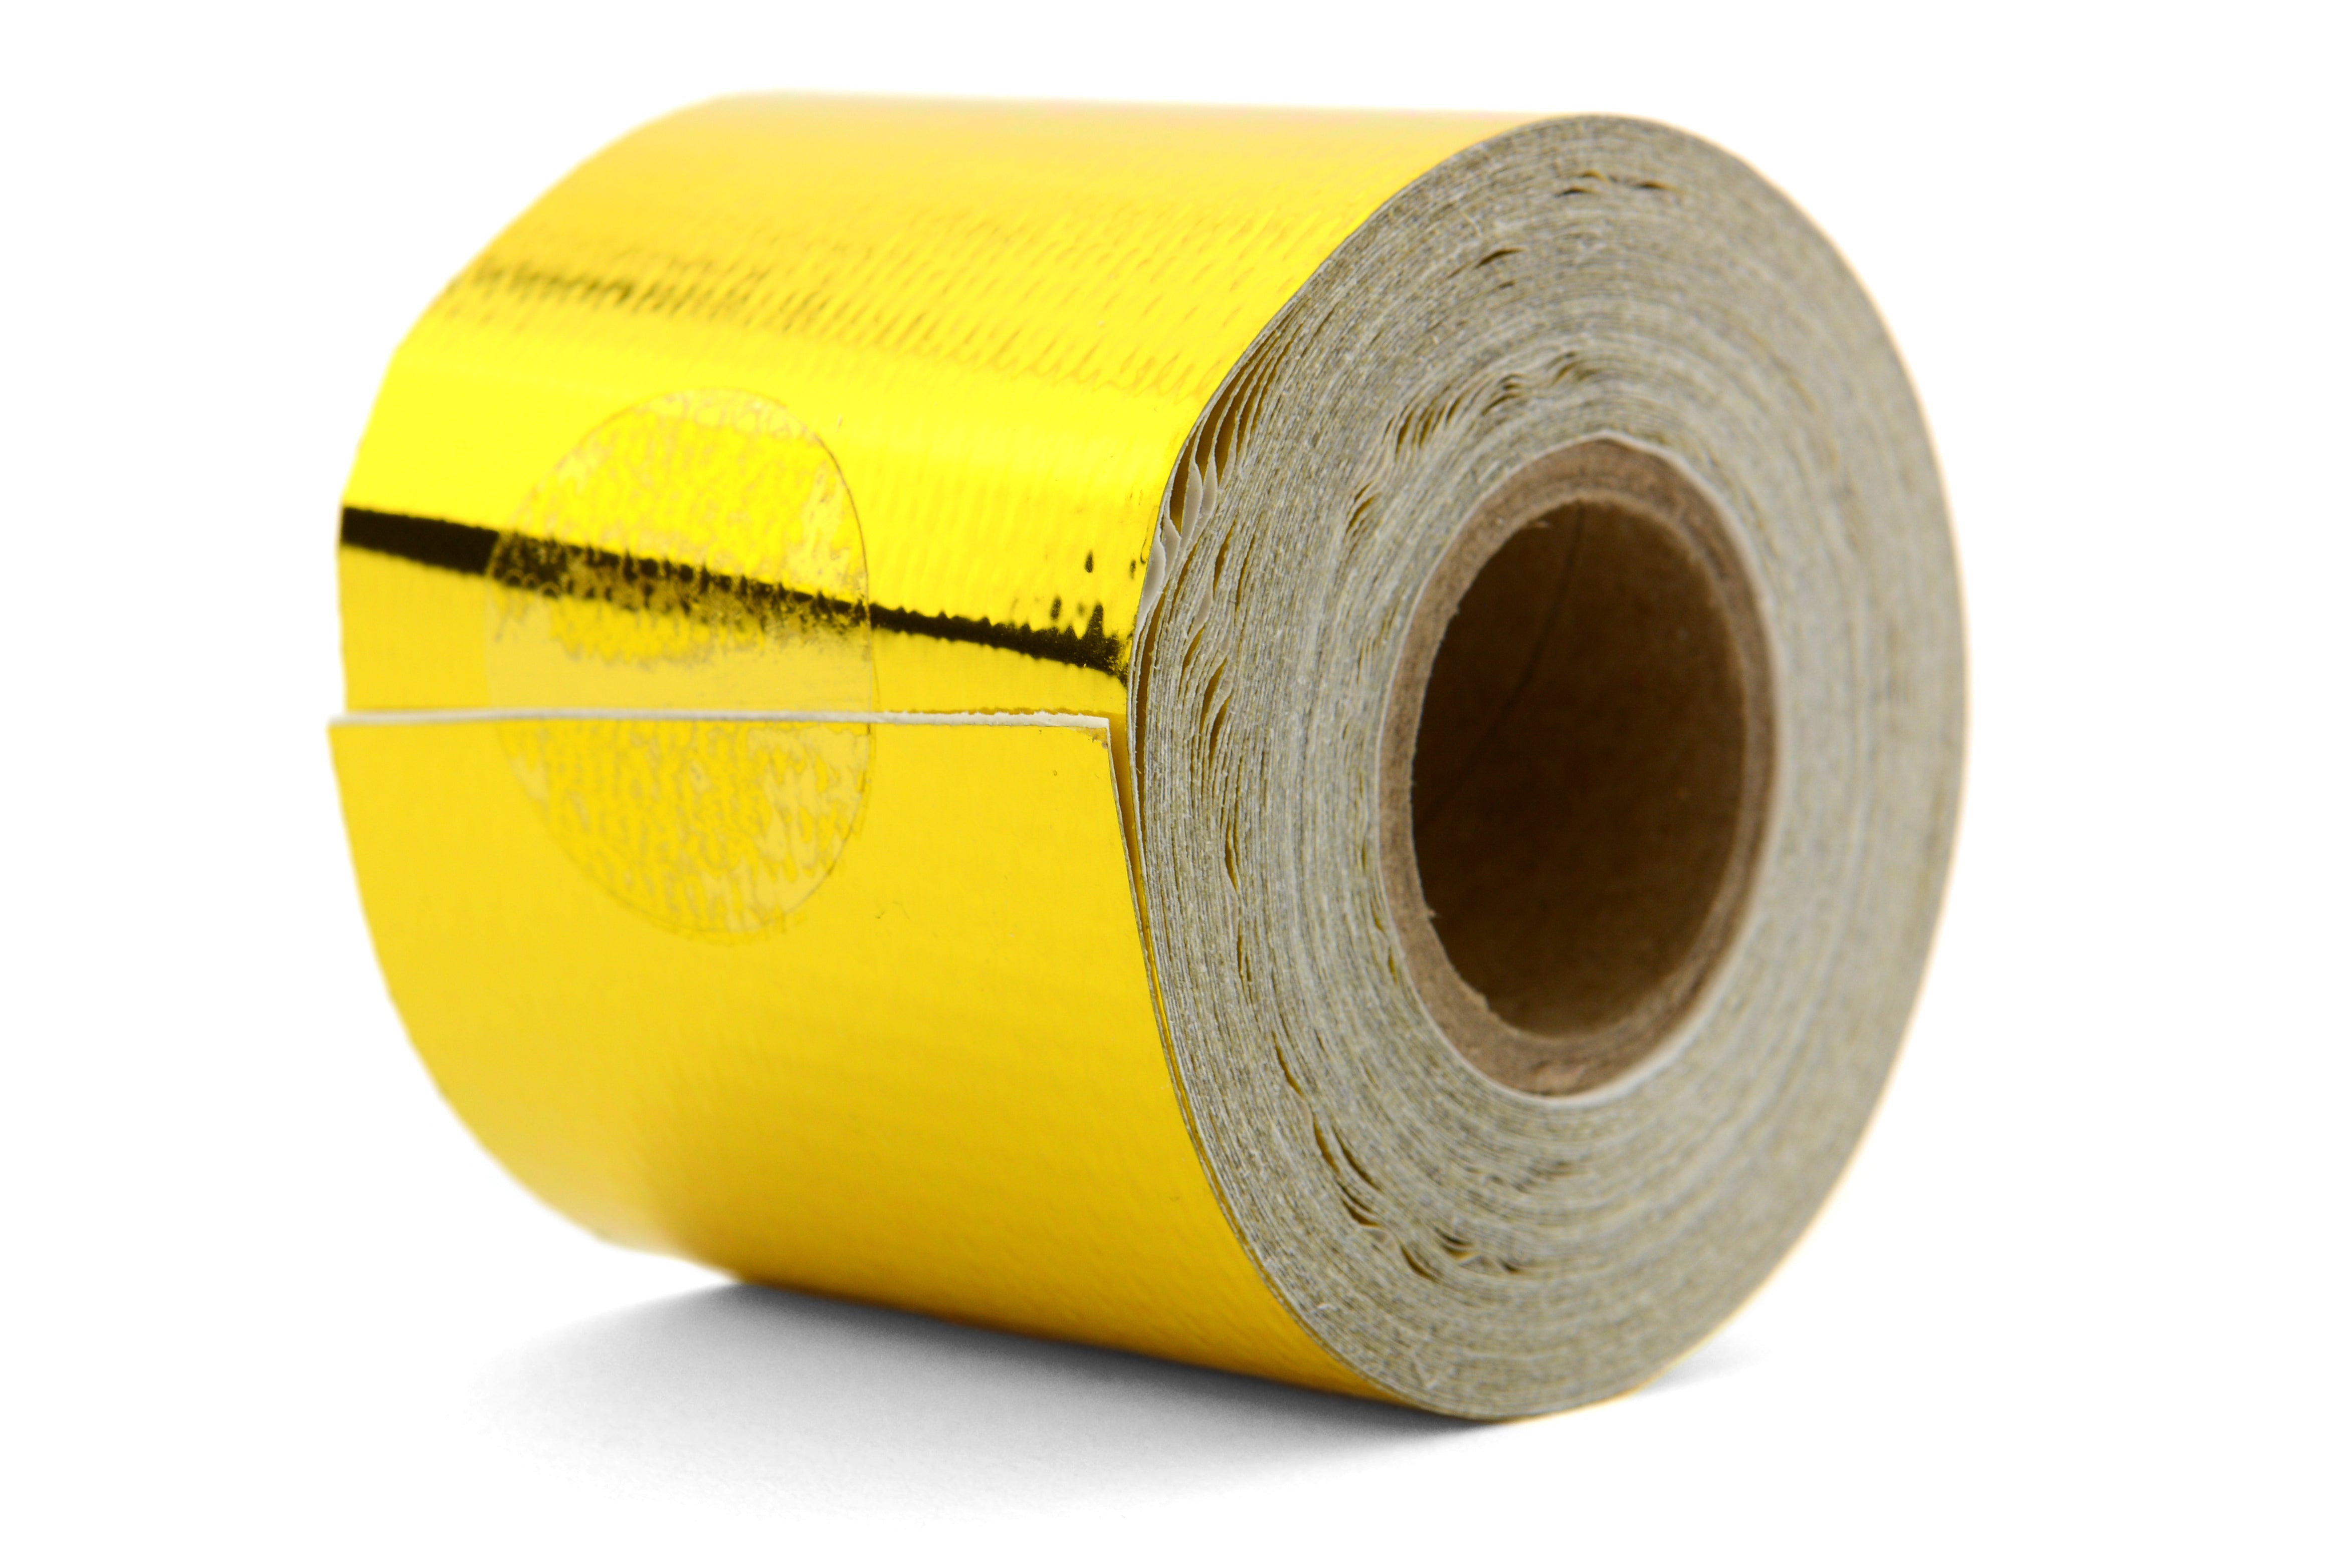 DEI 010397 - Reflect-A-GOLD 2in x 30ft Tape Roll